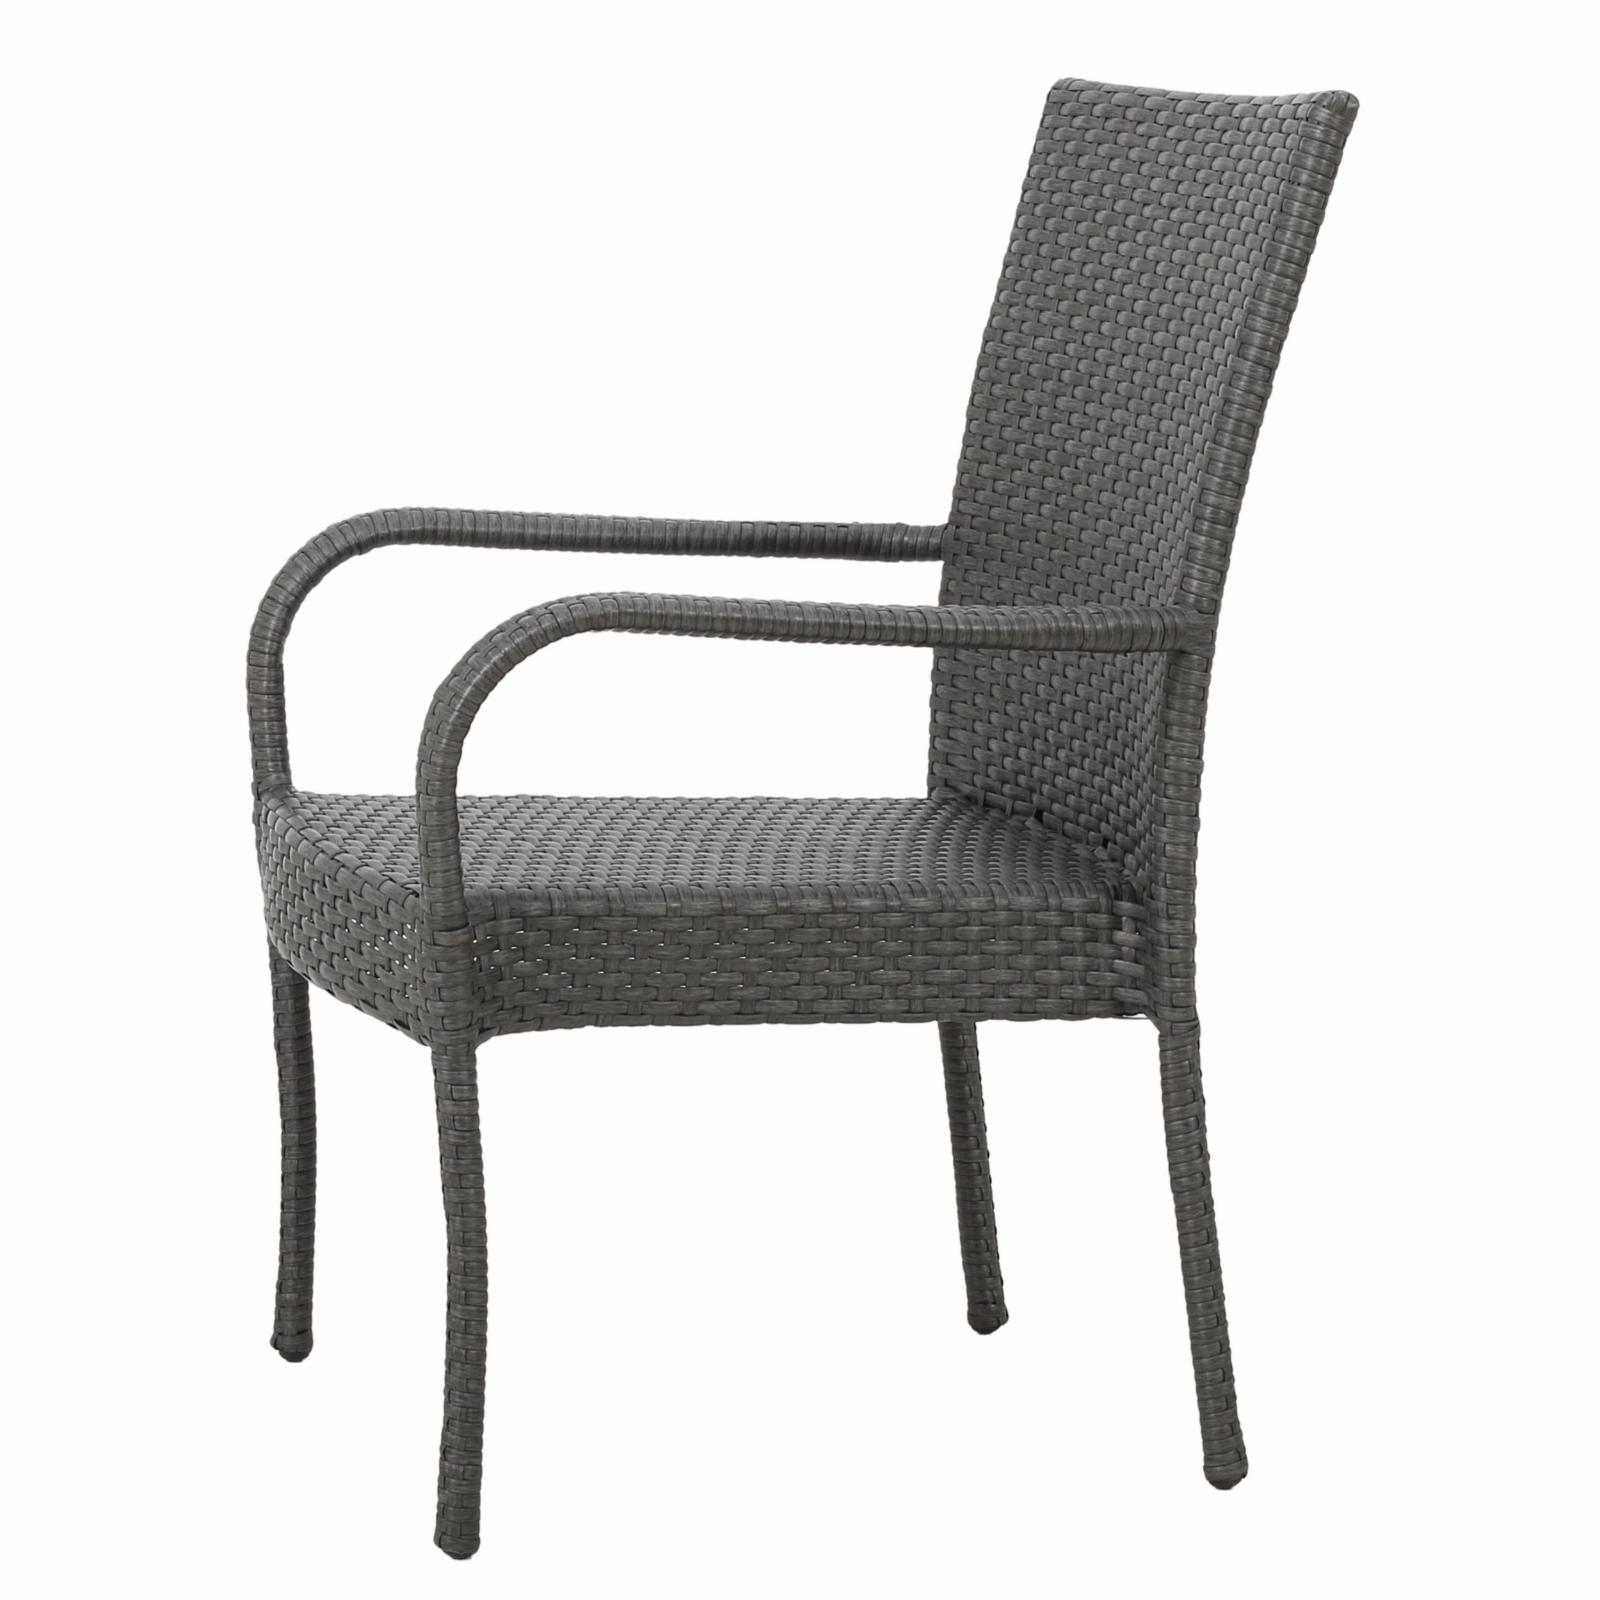 Nicoleta Outdoor Wicker 2 Seater Stacking Chair Chat Set - Gray - image 5 of 10